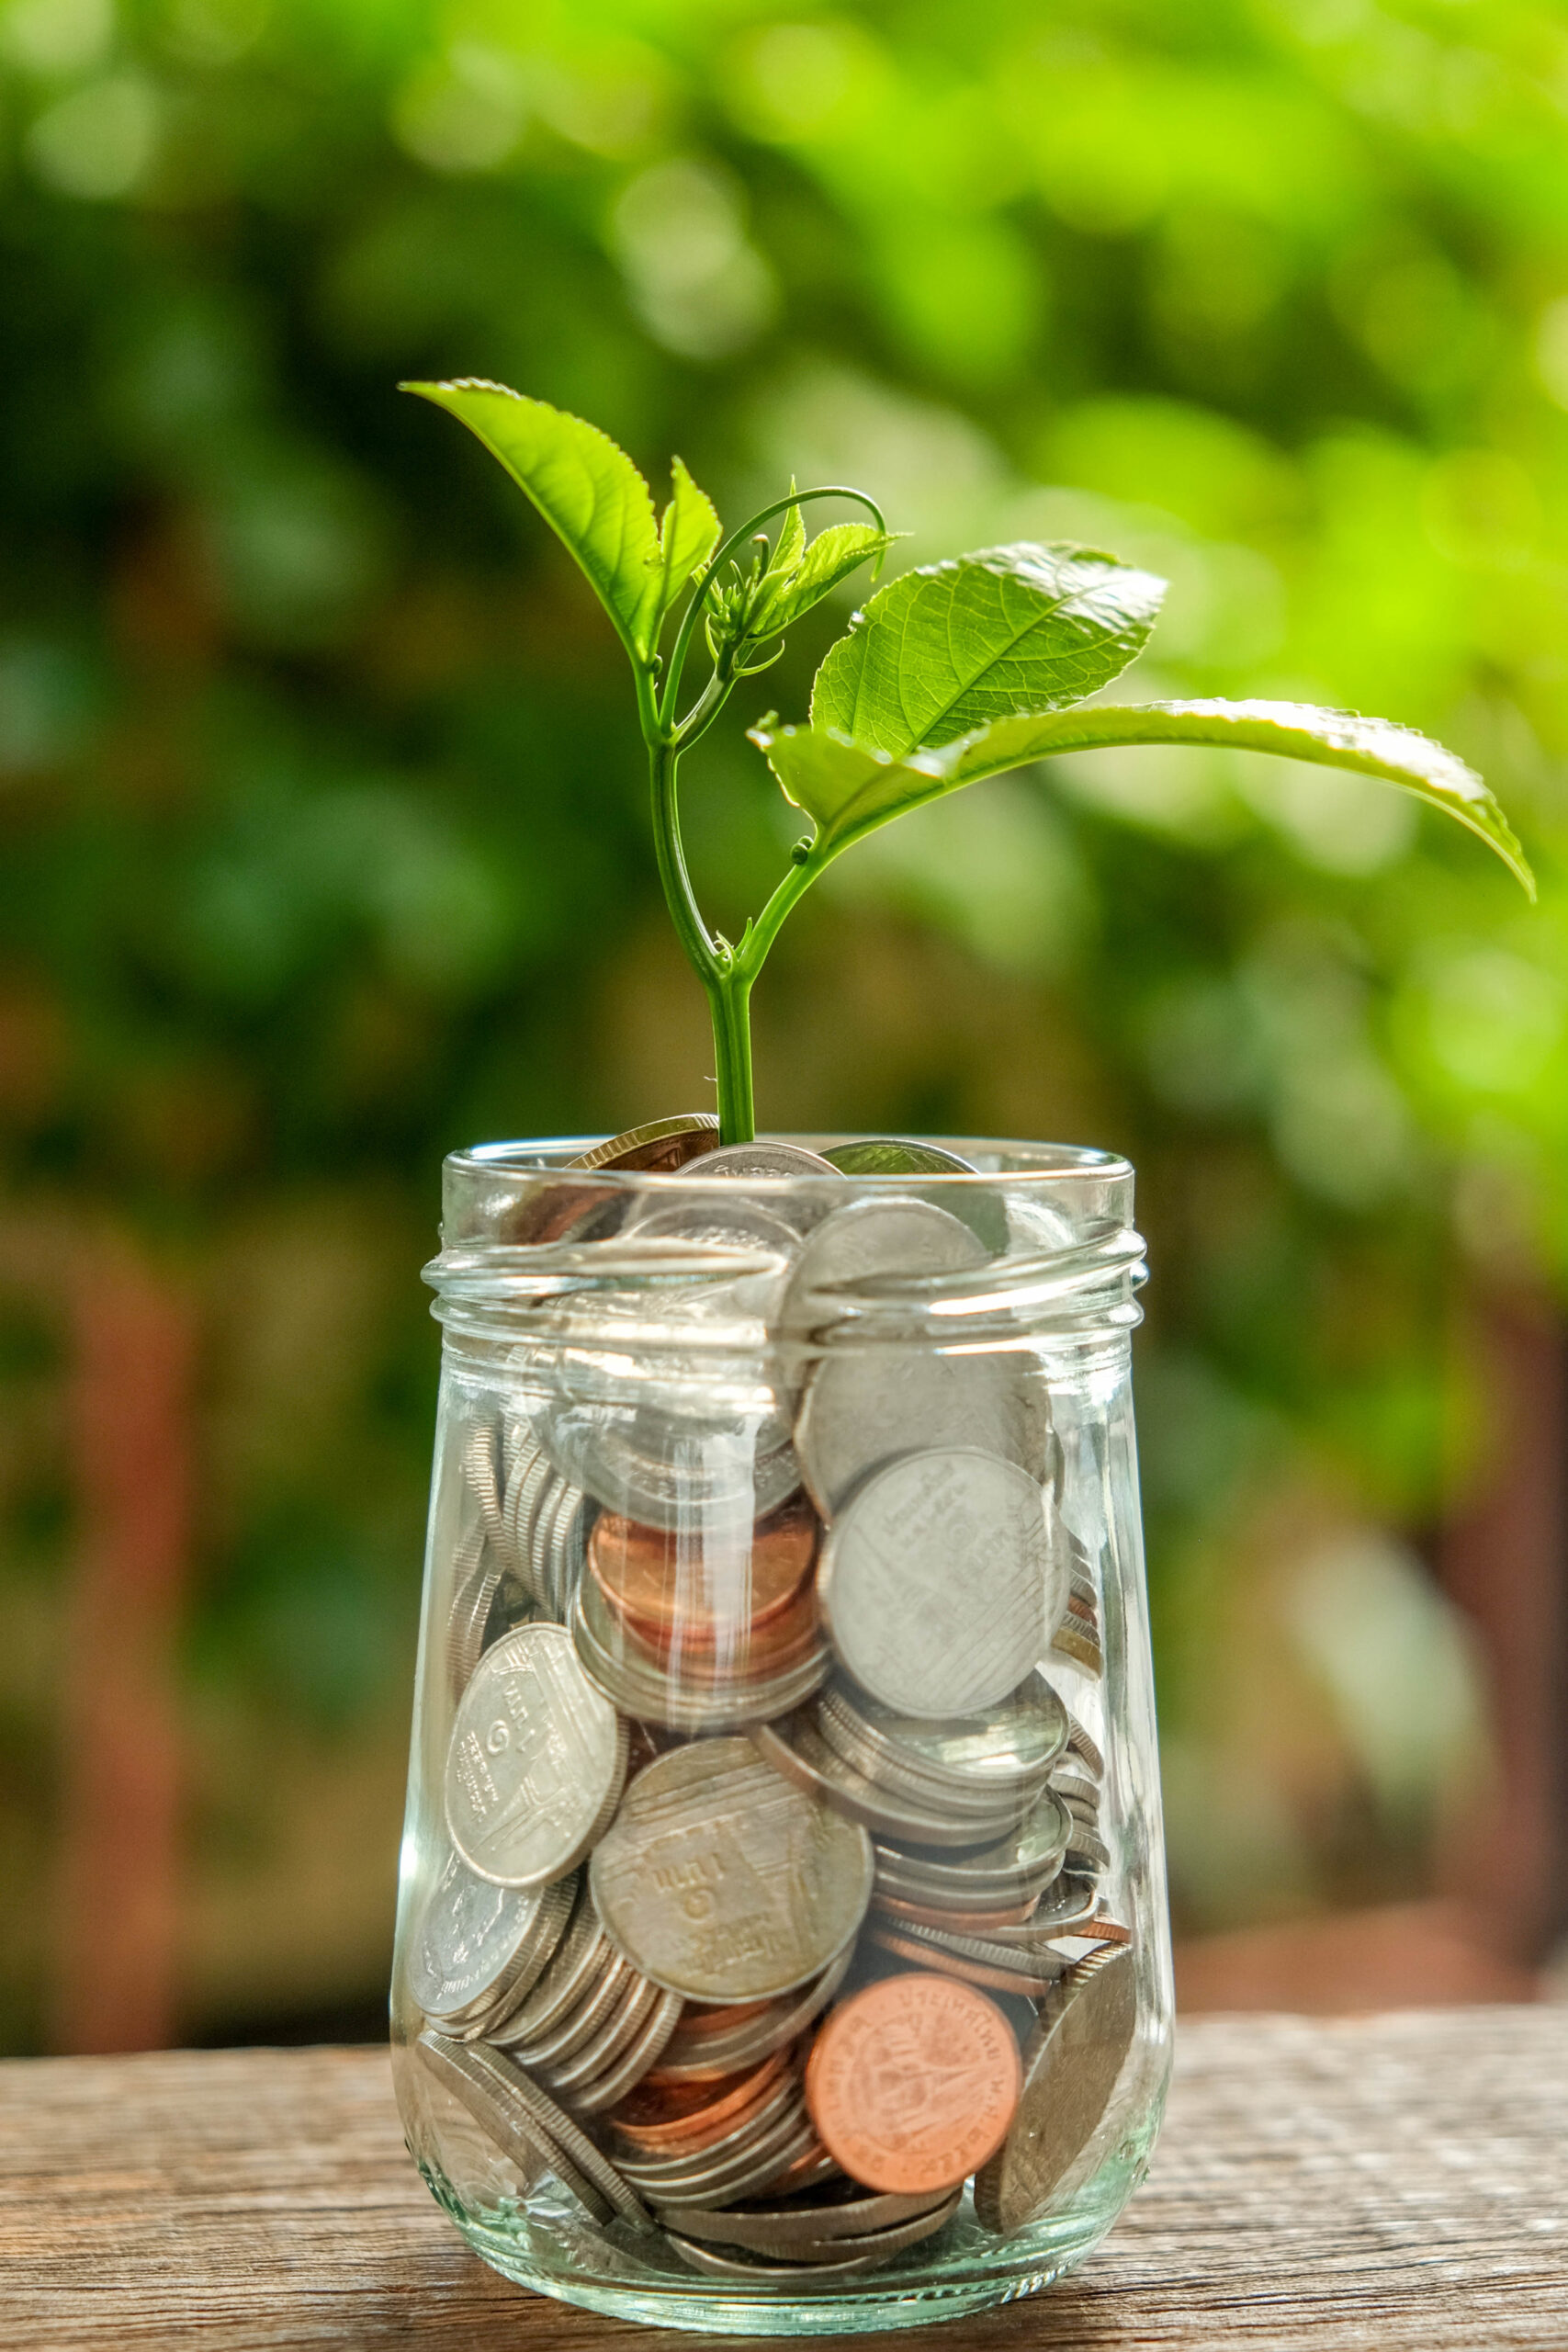 investment concept. plant growing out of coins